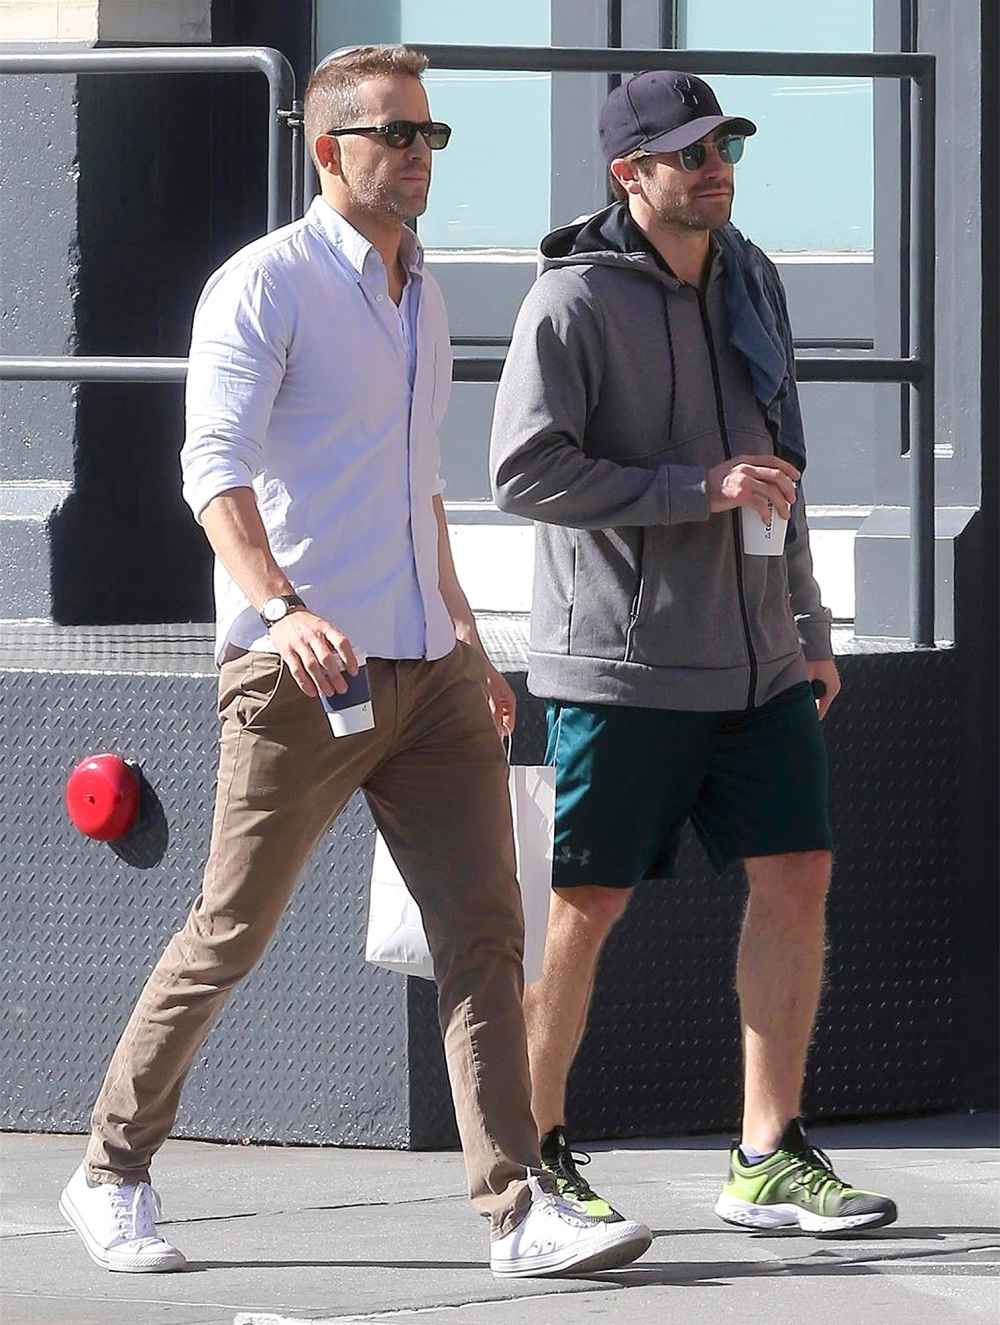 Jake Gyllenhaal and Ryan Reynolds grab a cup of coffee together